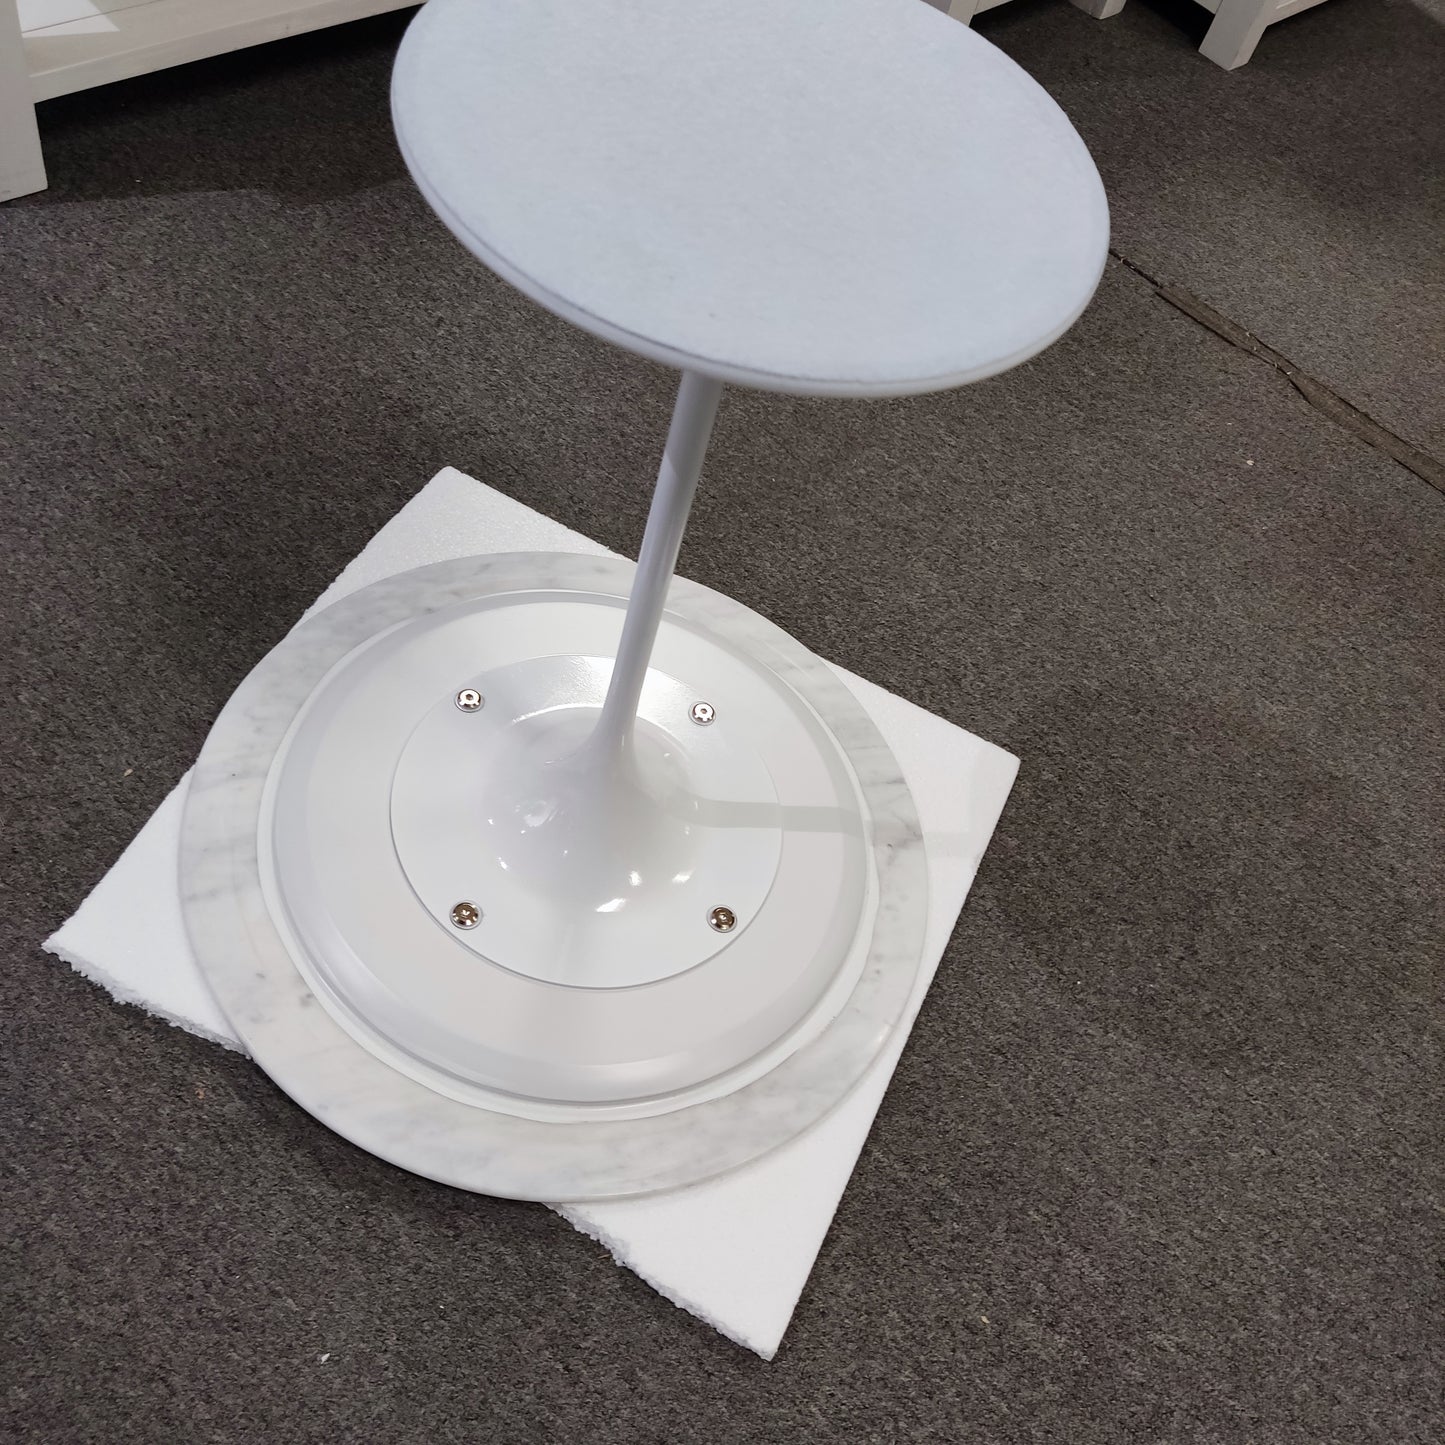 Marble top Tulip Side Table, available now